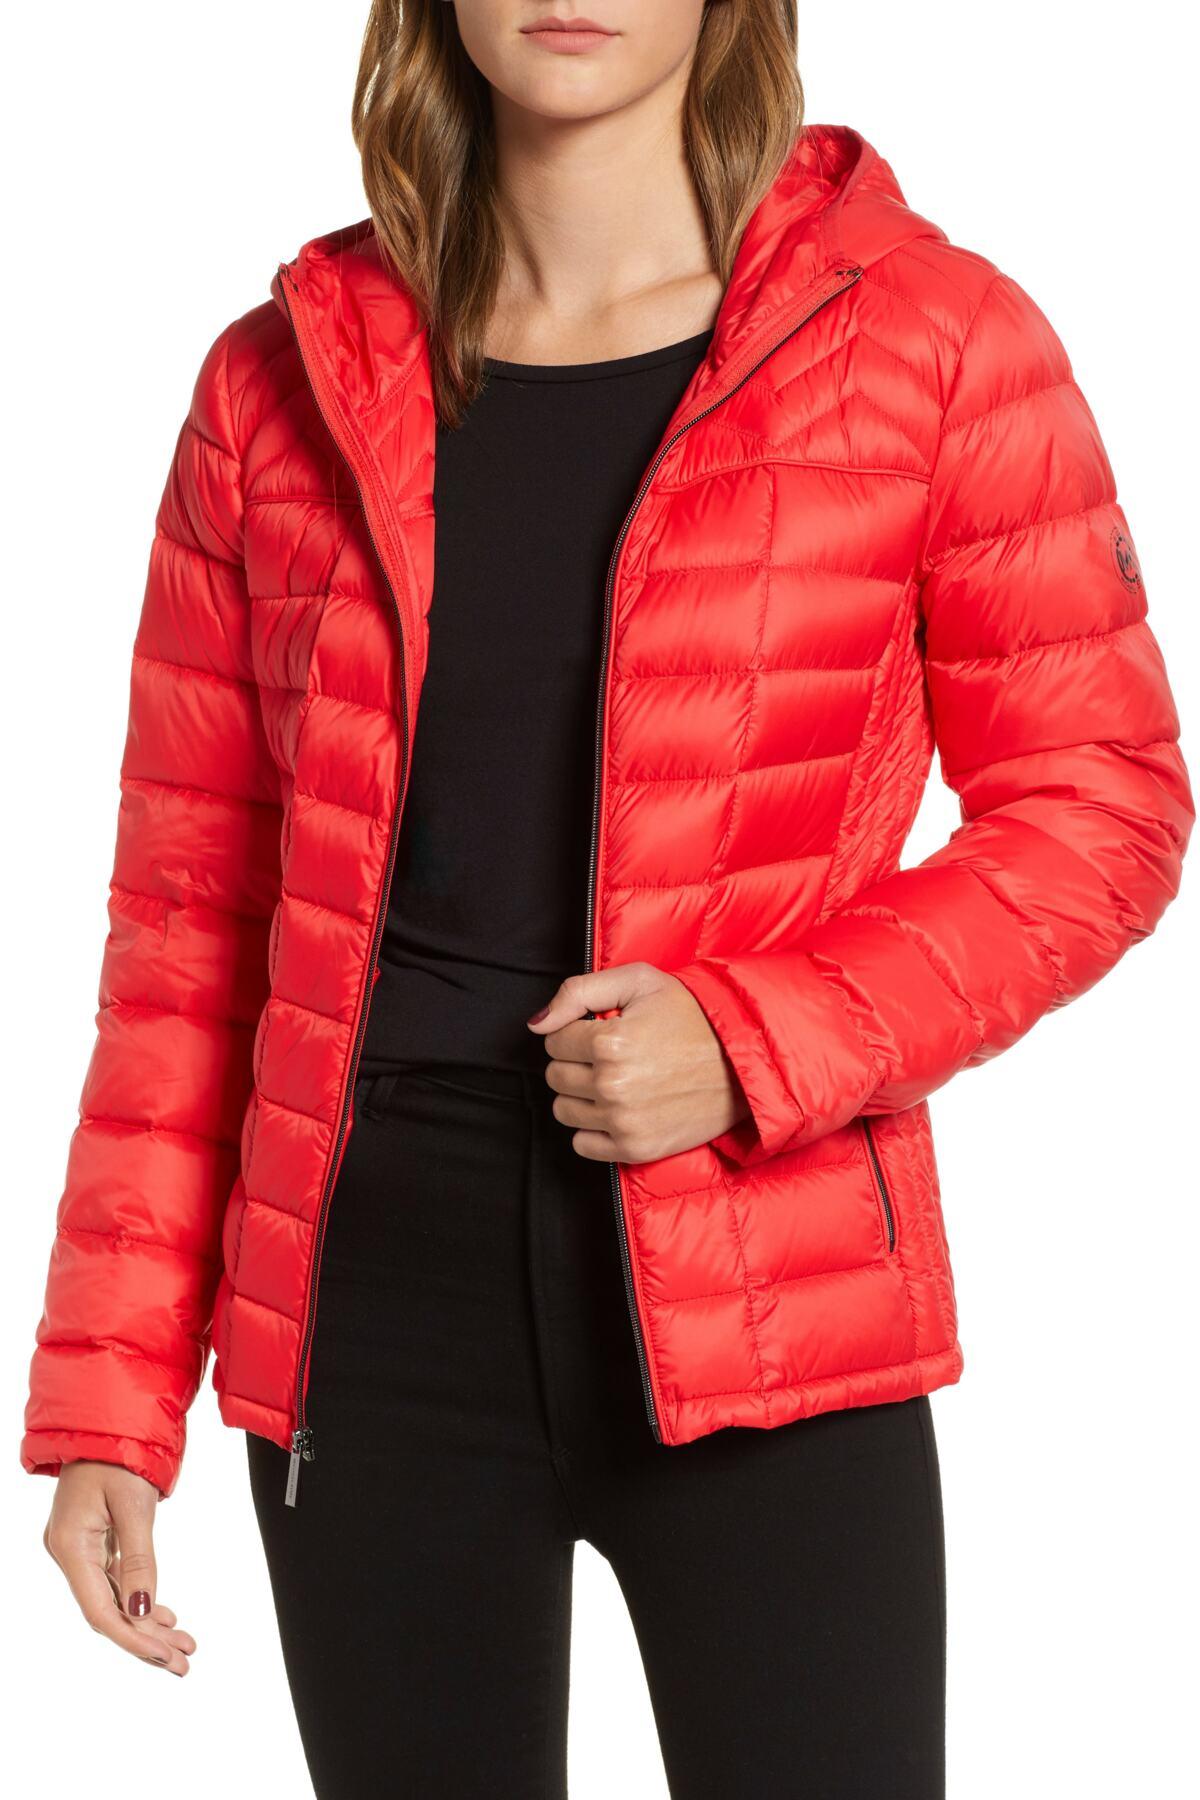 MICHAEL Michael Kors Packable Down Puffer Jacket in Red - Lyst